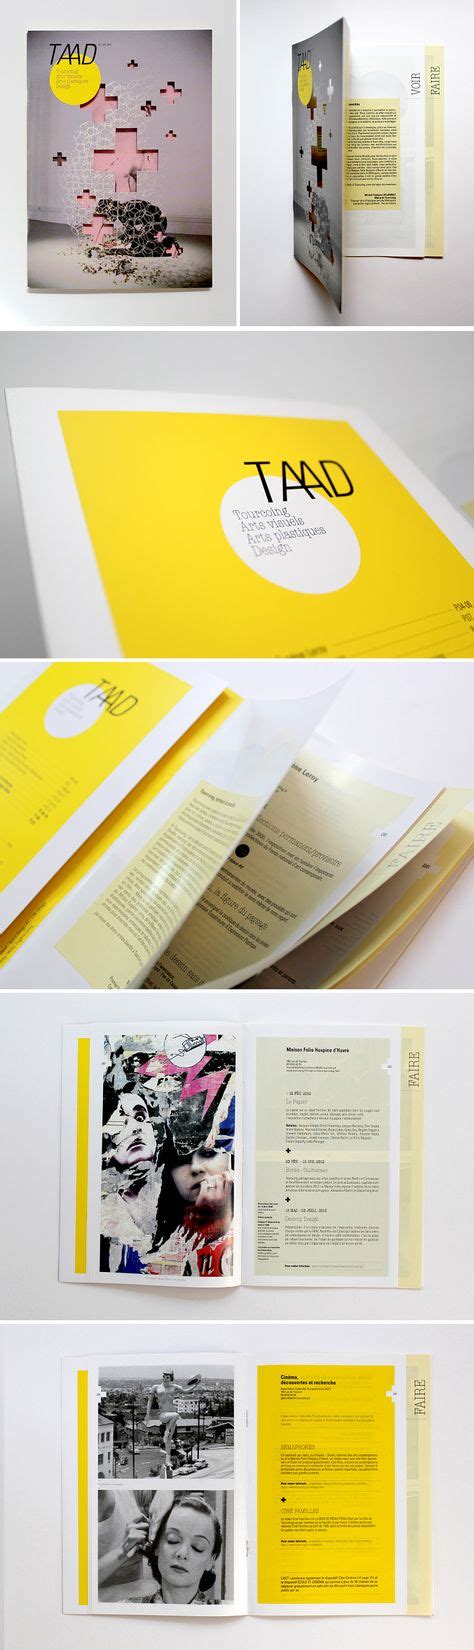 290 Booklet Layouts Ideas Booklet Layout Editorial Design Print